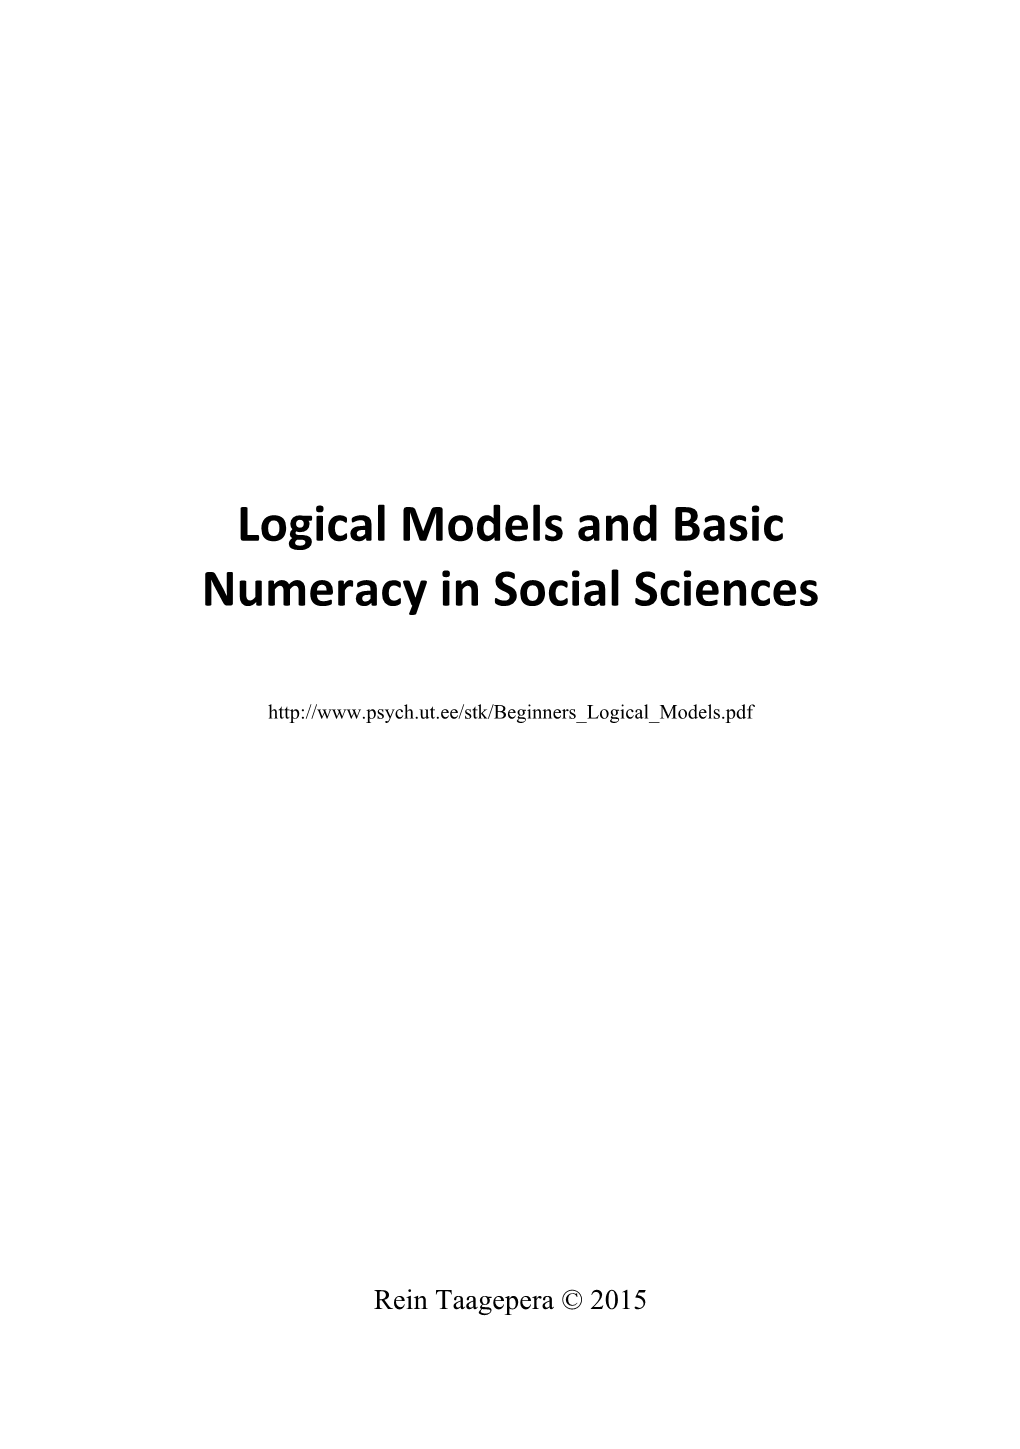 Logical Models and Basic Numeracy in Social Sciences